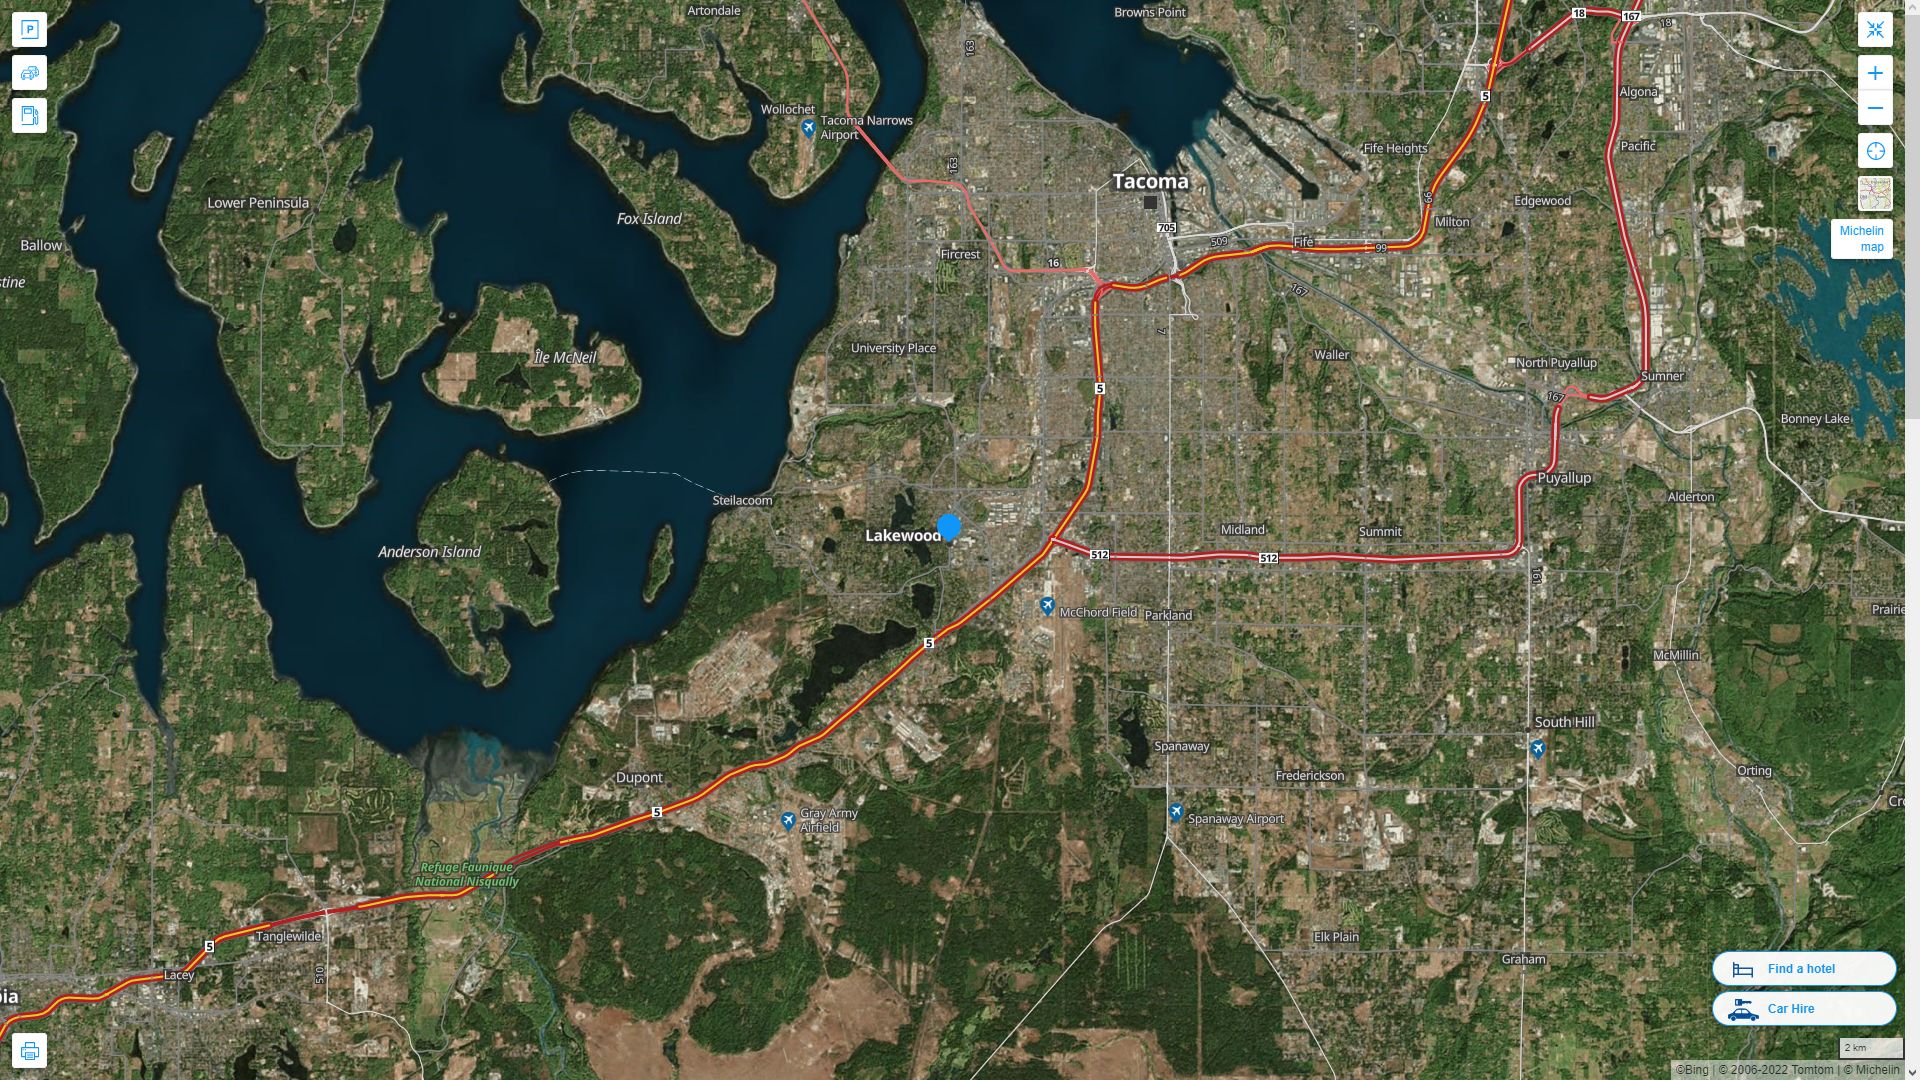 Lakewood Washington Highway and Road Map with Satellite View